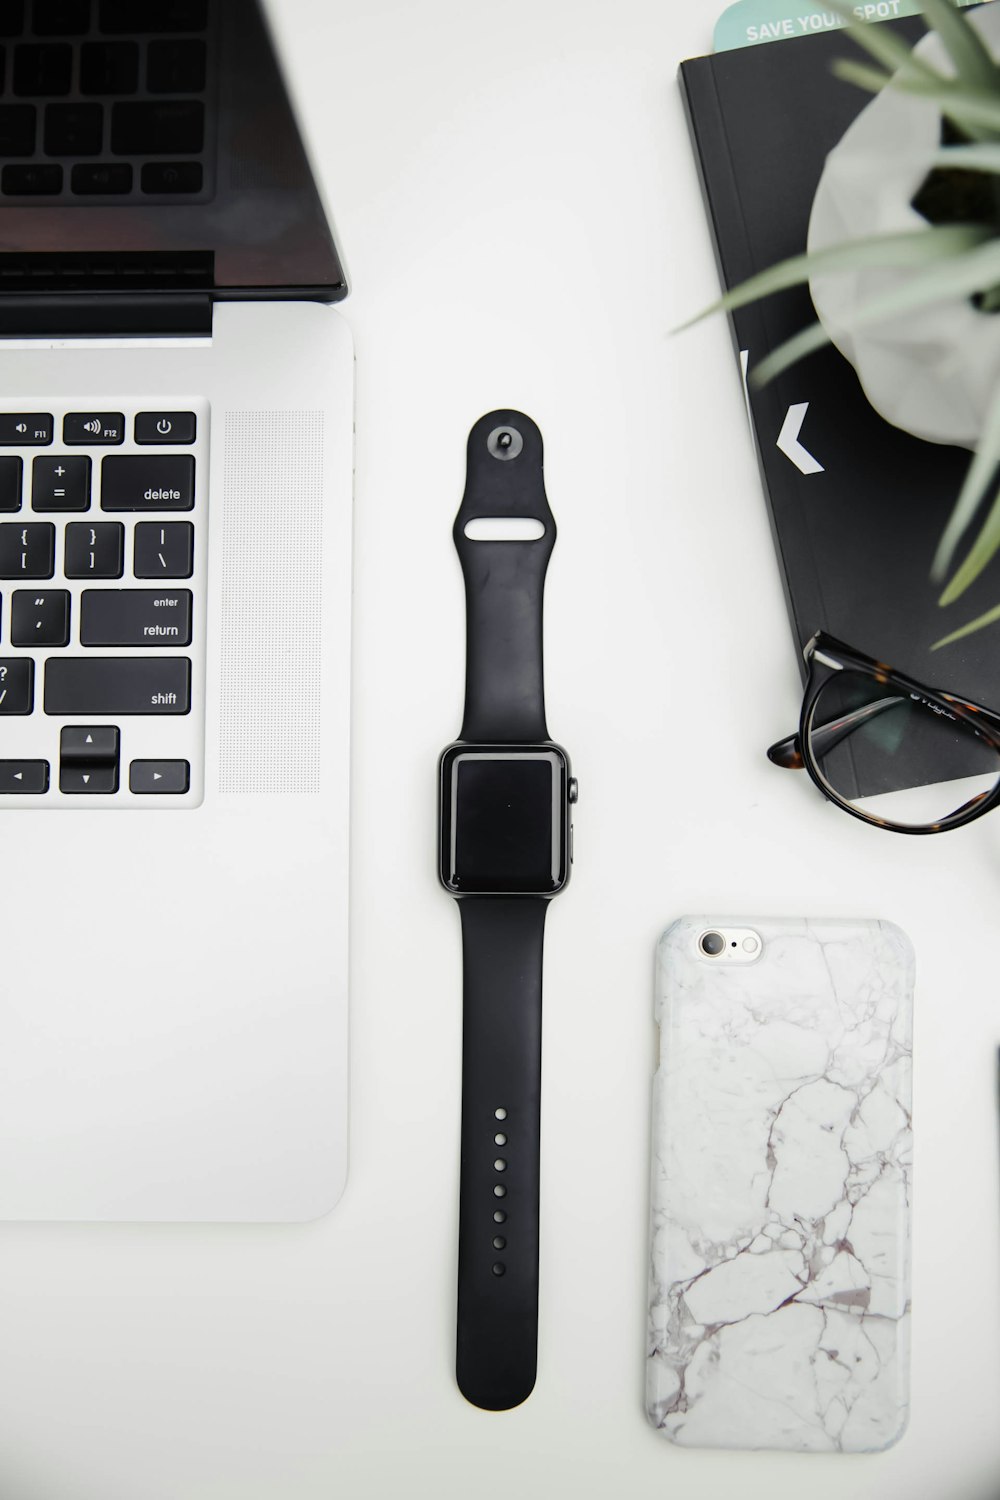 an apple watch, a cell phone, and a laptop on a desk